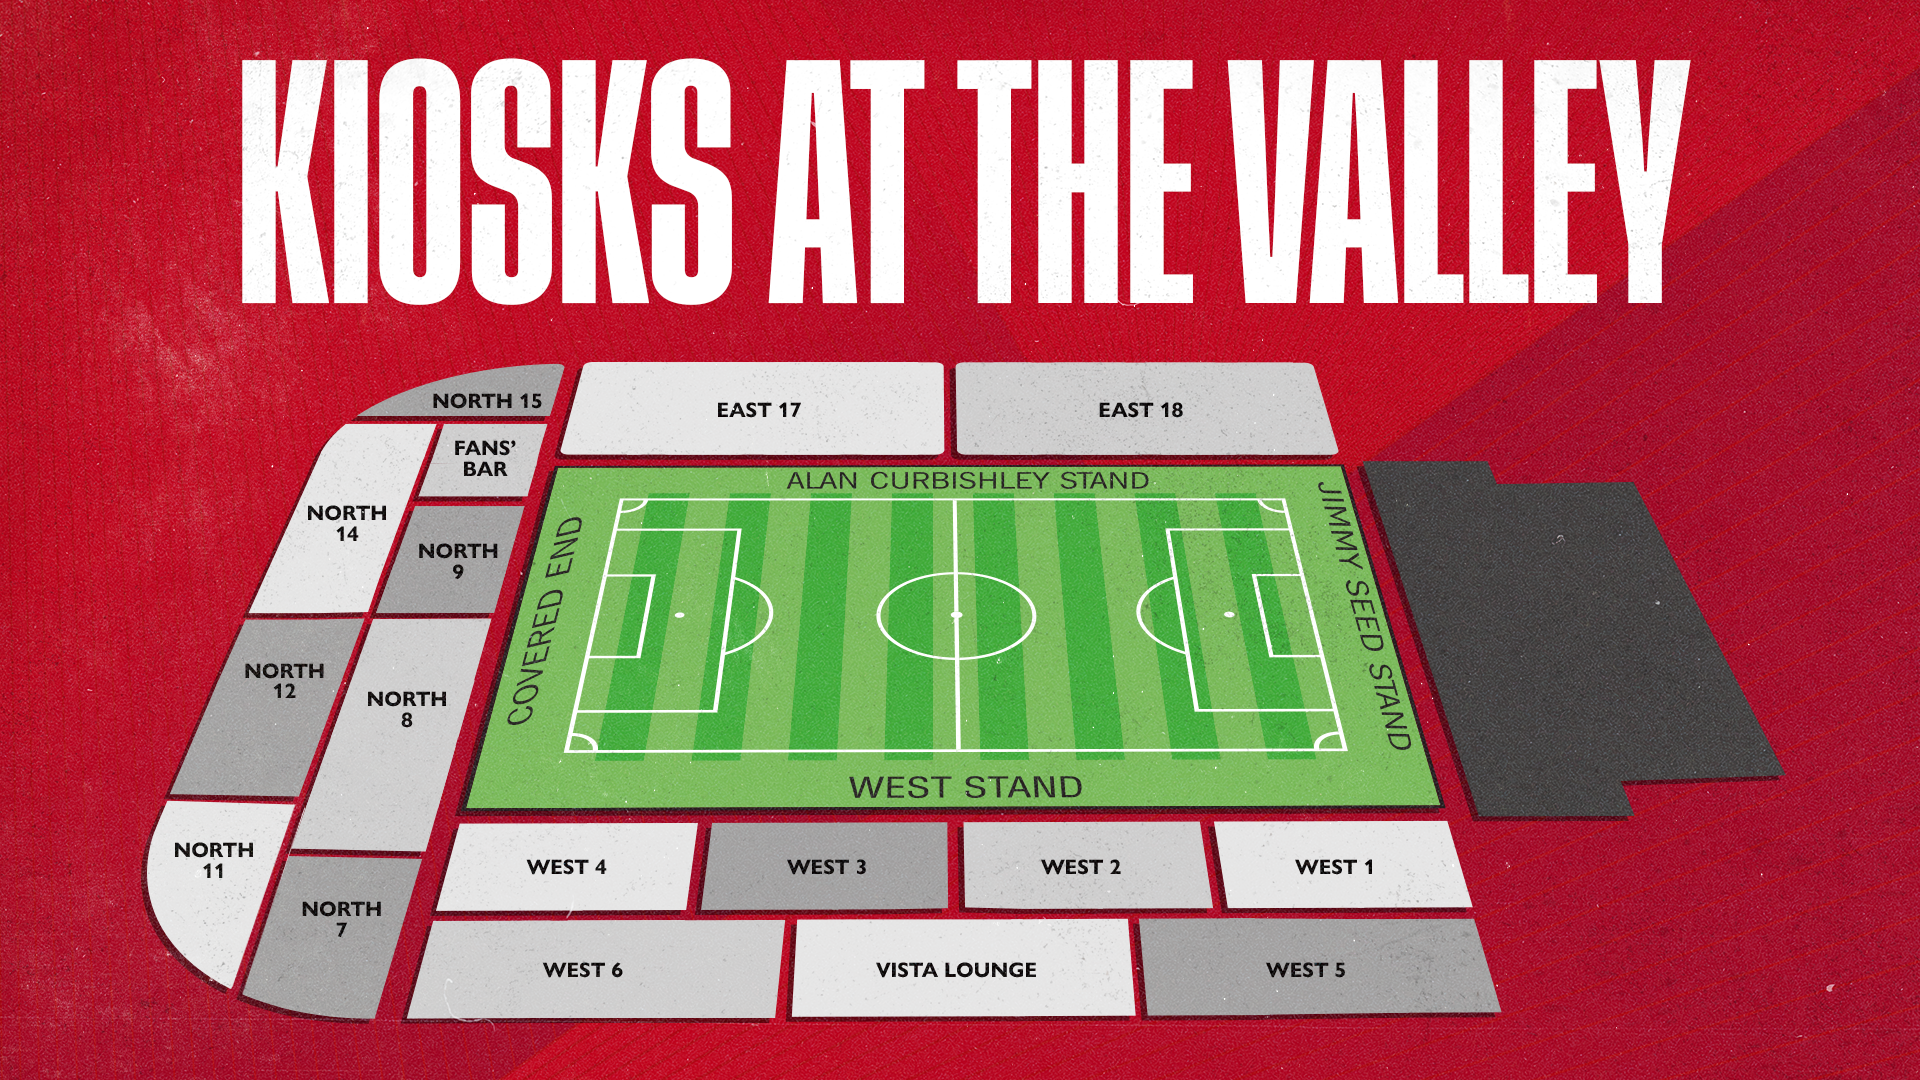 Kiosk map at The Valley